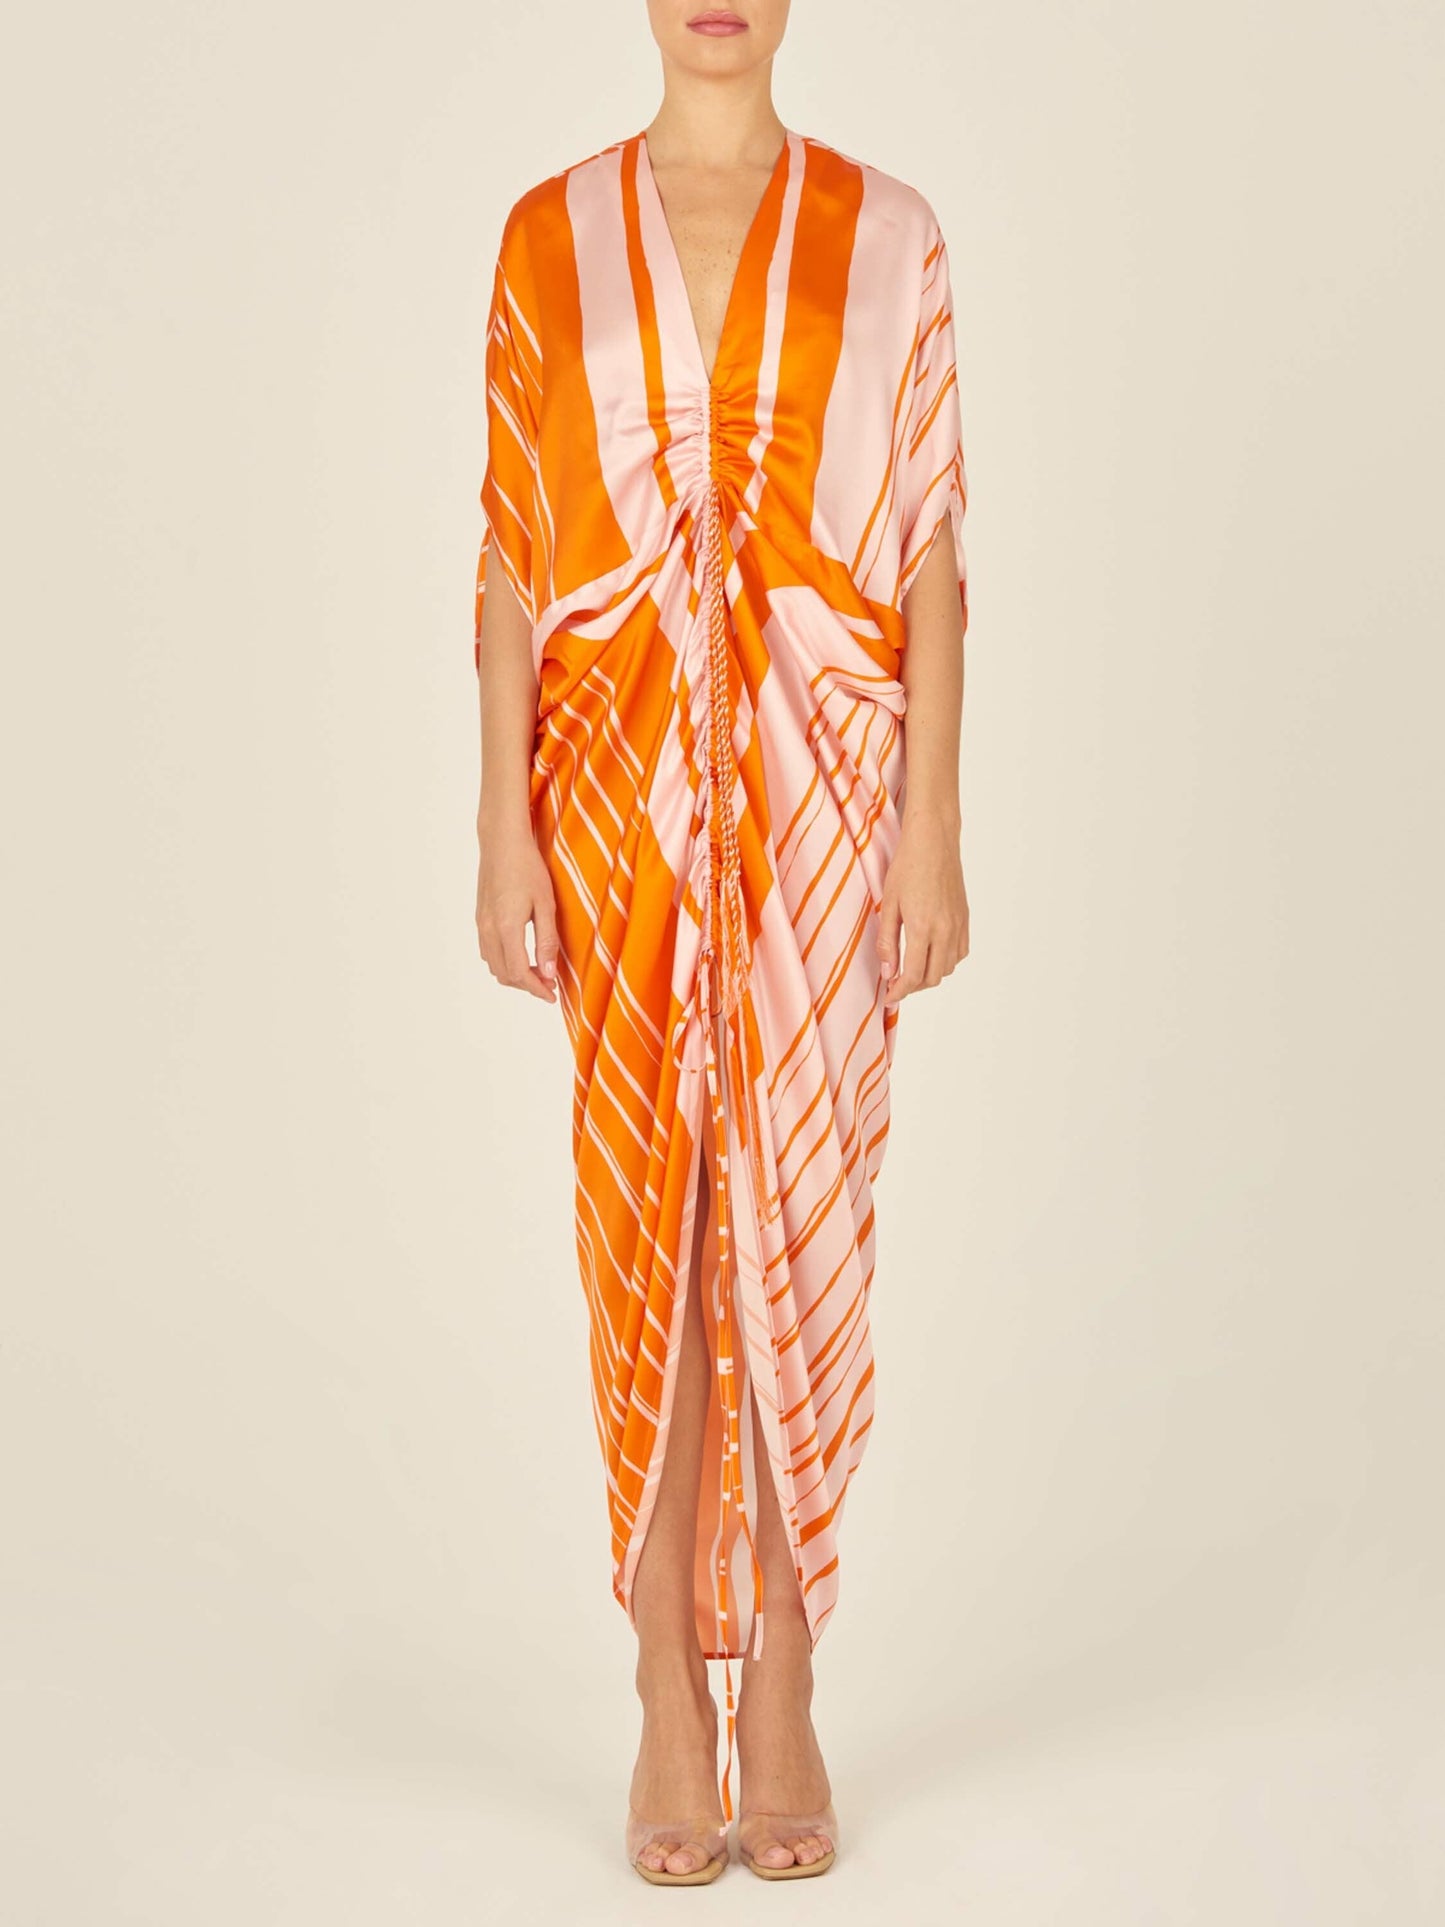 An Cloister Dress Orange Pink with a festive print on a mannequin.